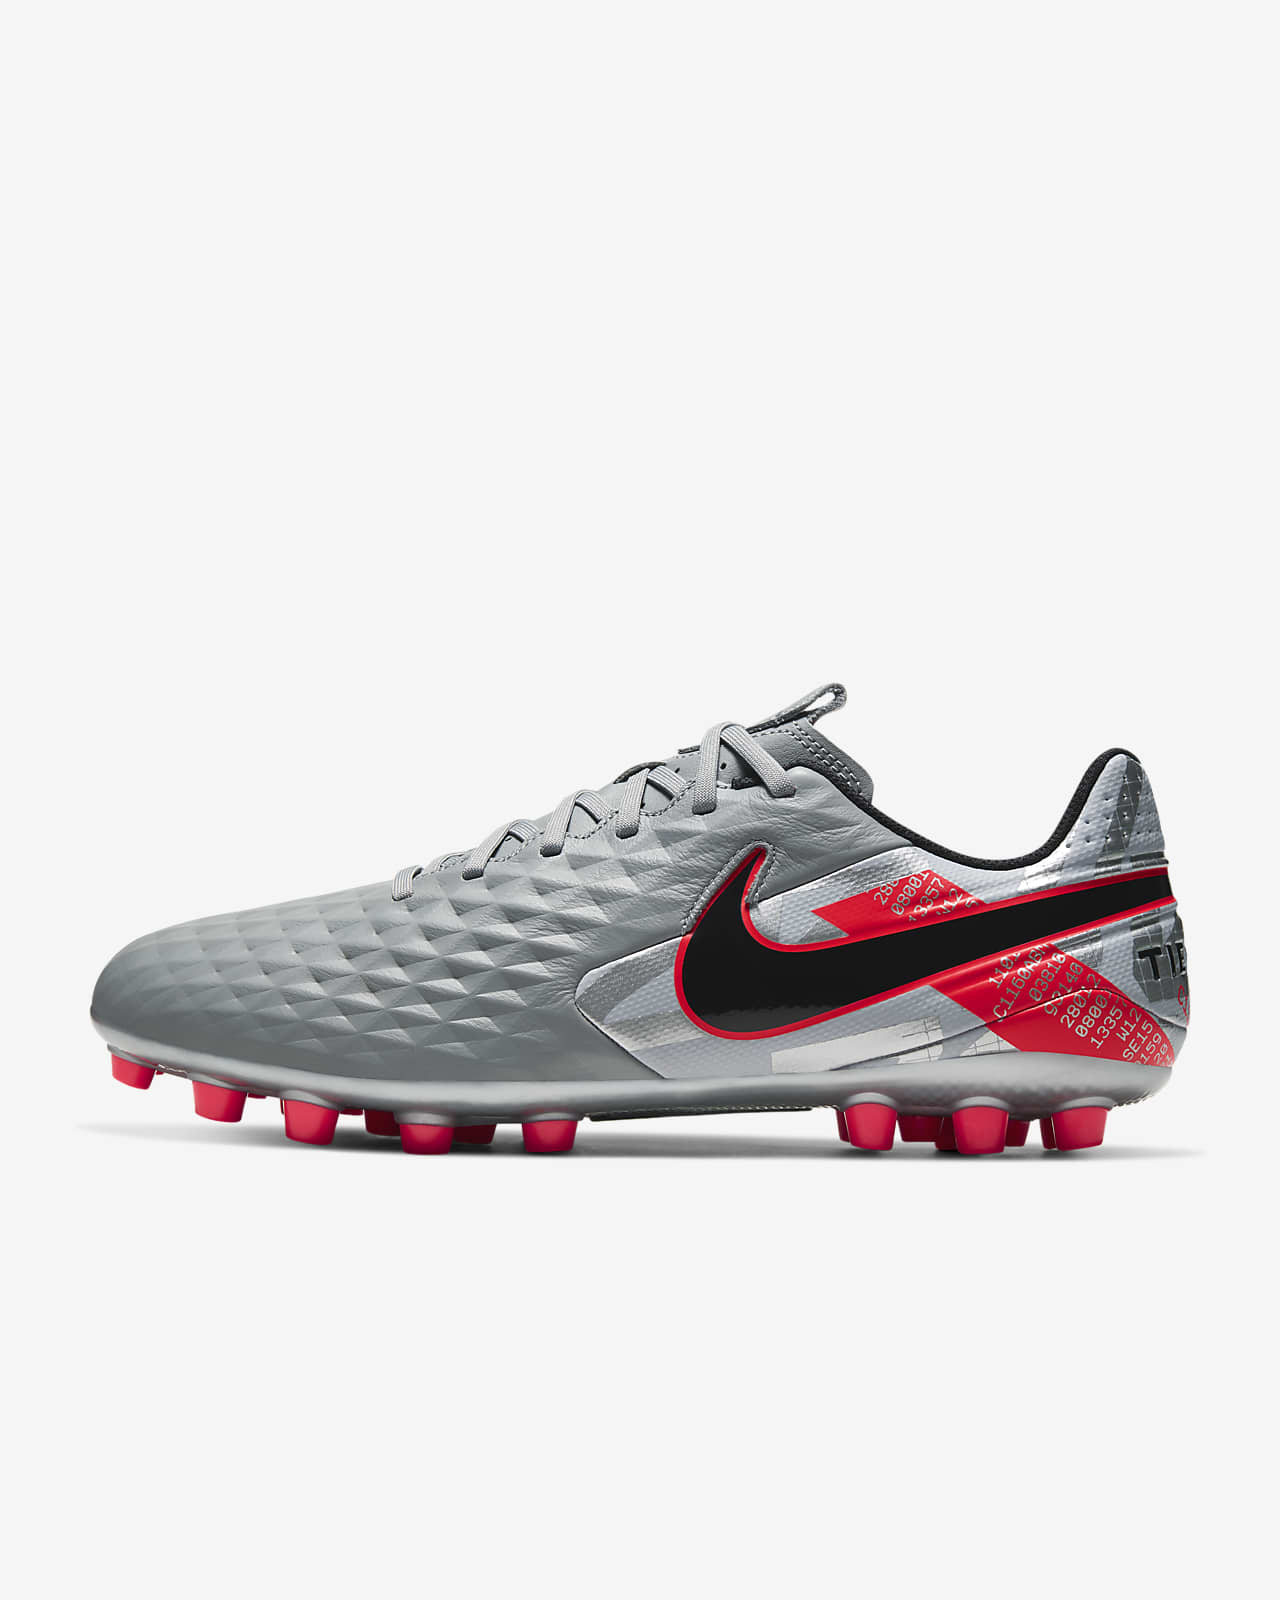 nike 3g boots